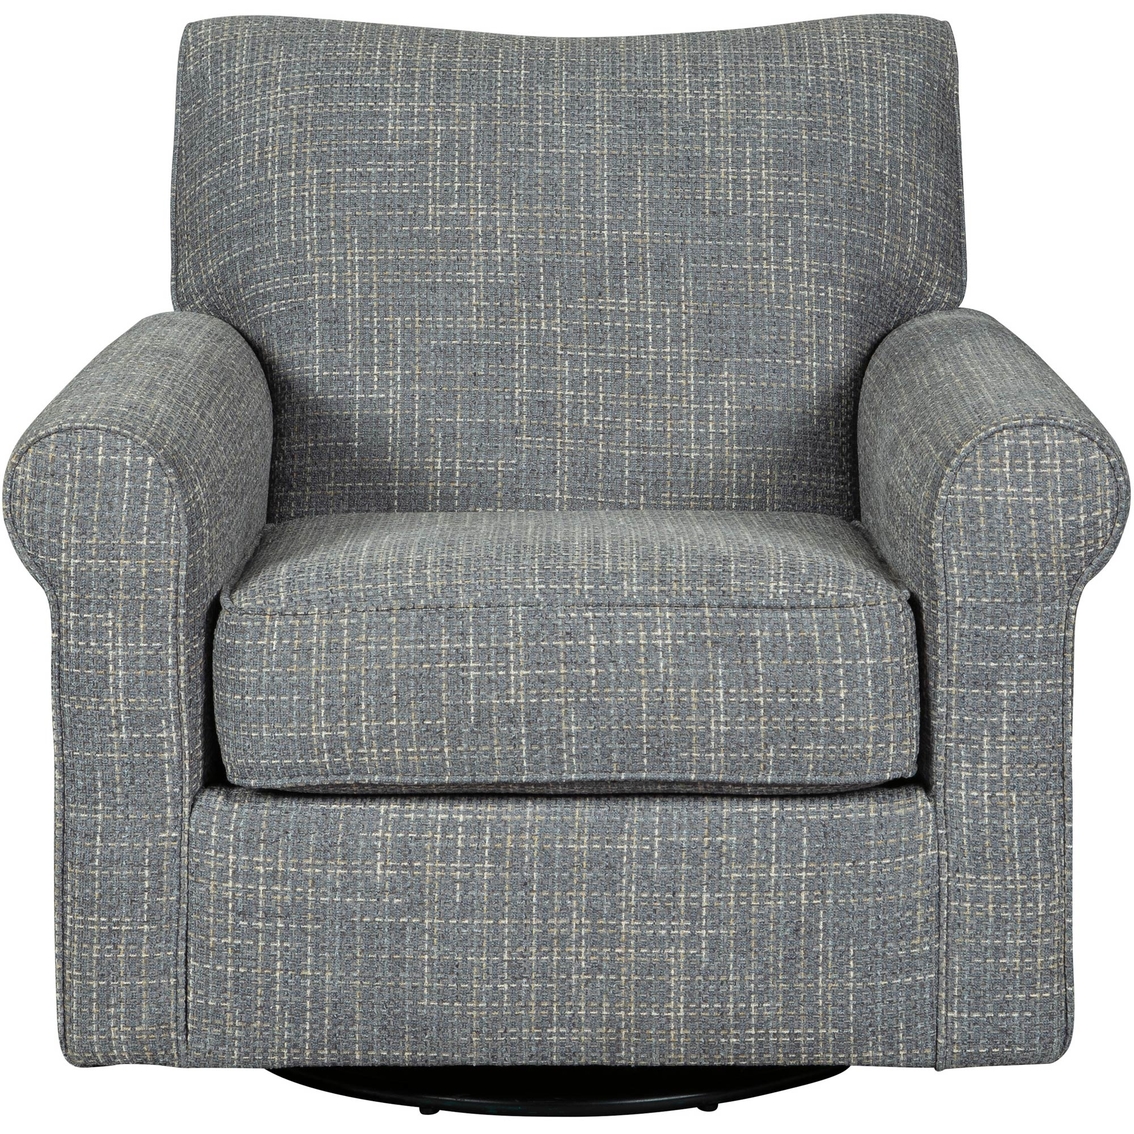 Signature Design by Ashley Renley Swivel Glider Accent Chair - Image 2 of 4